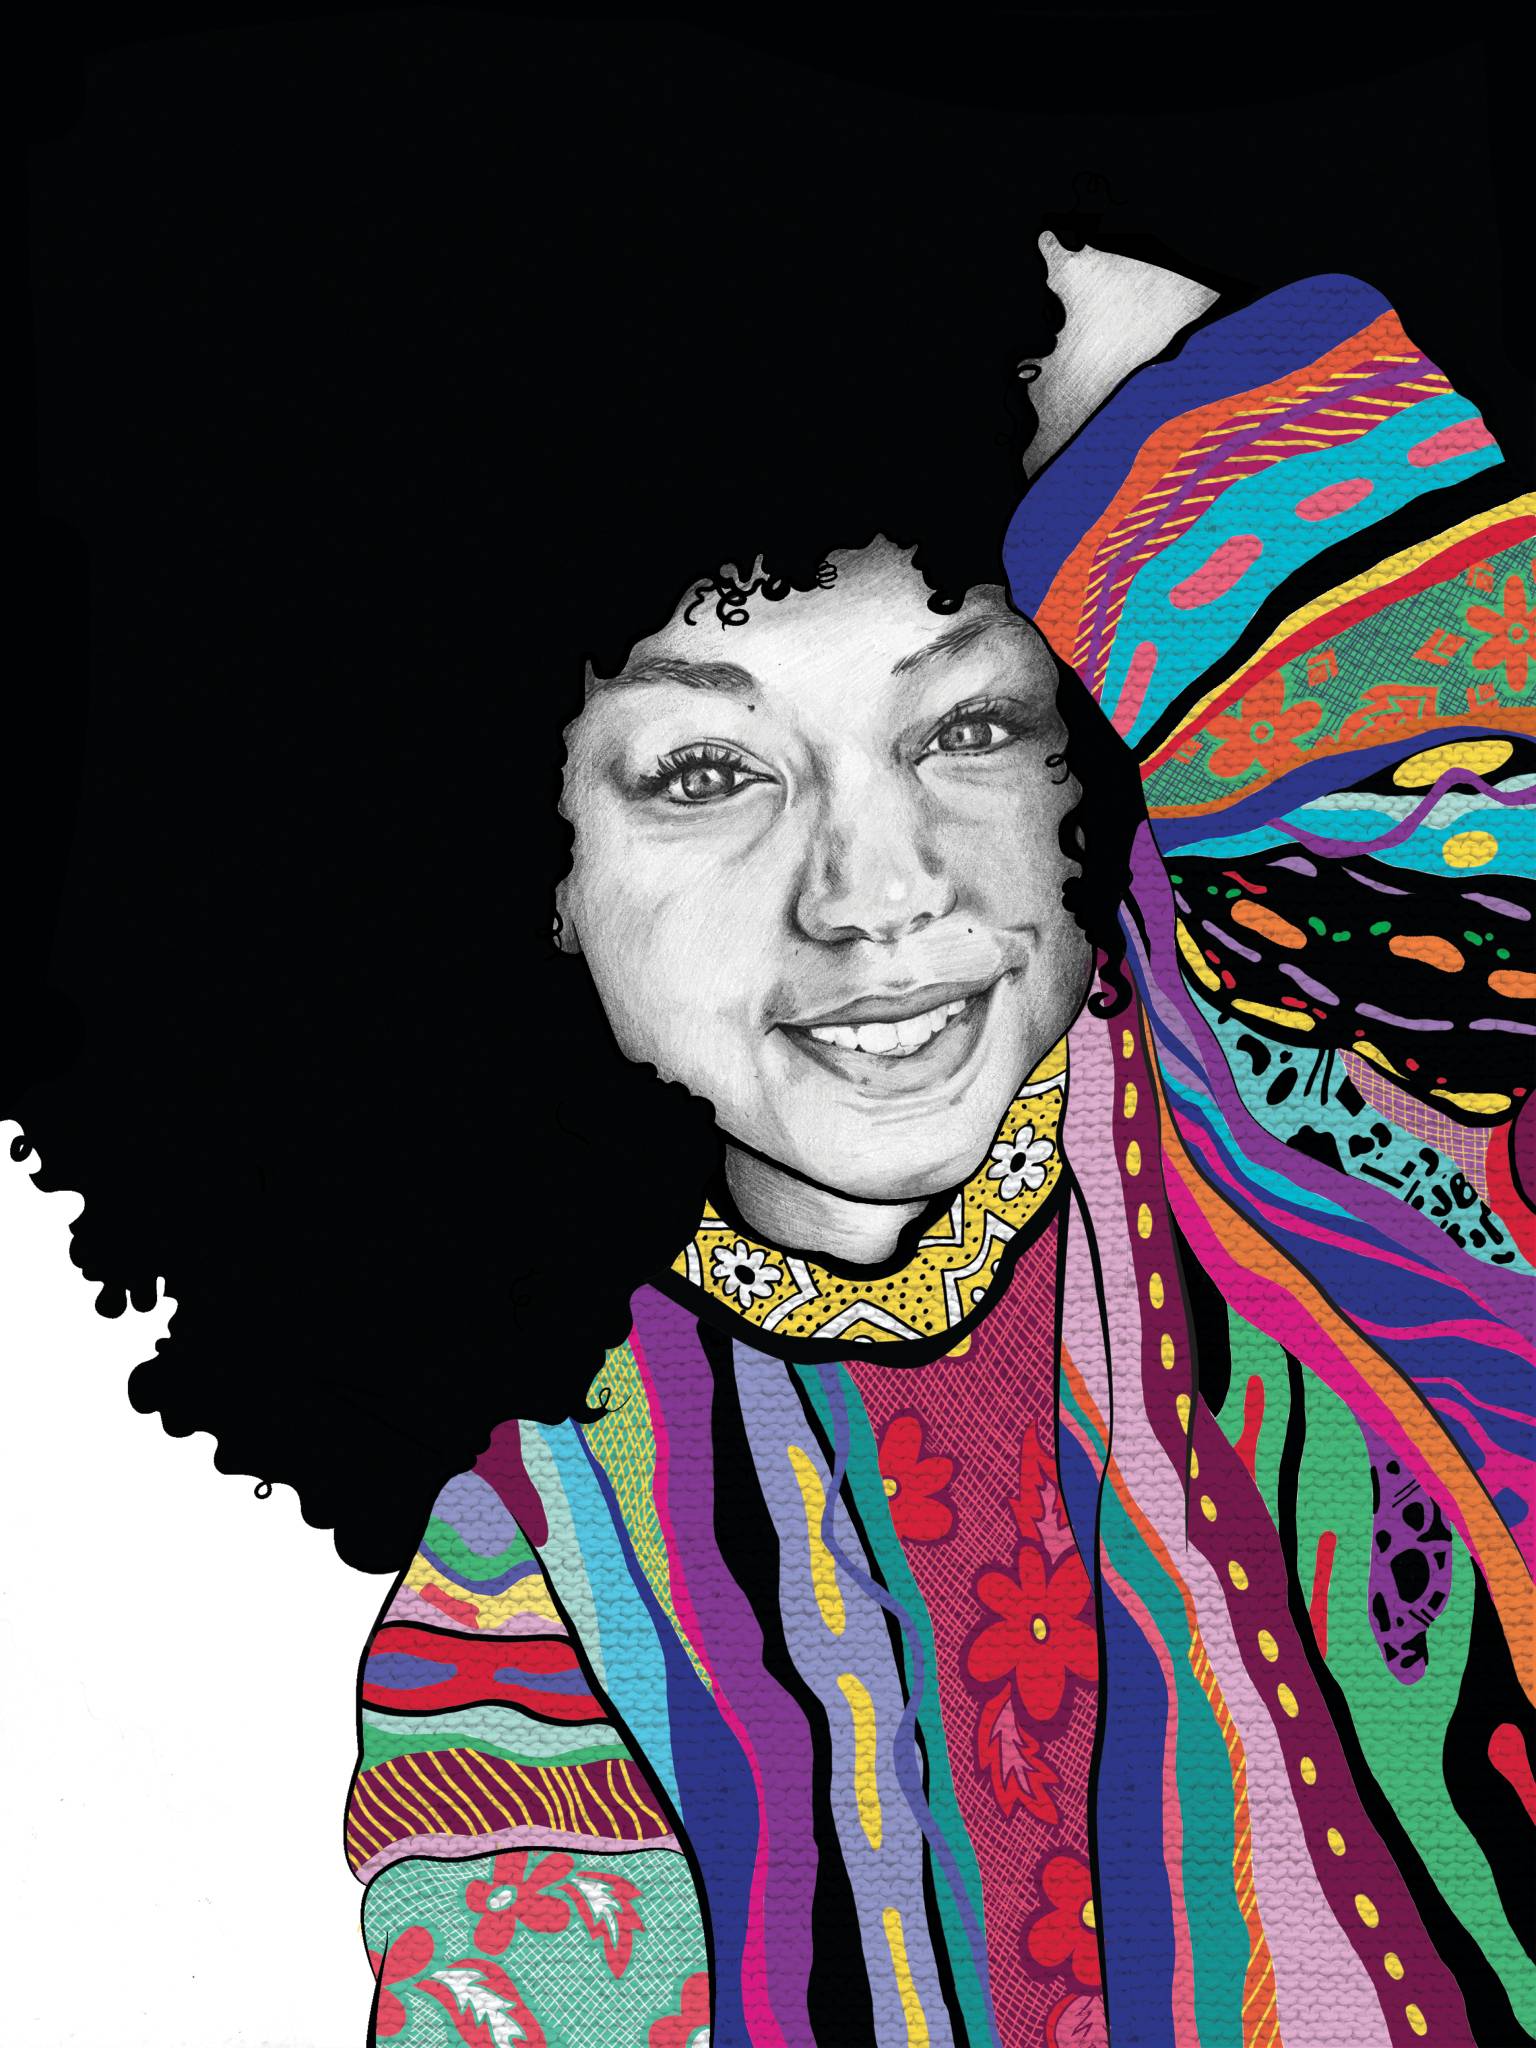 digital illustration of a young woman with afro smiling wearing colorful sweater